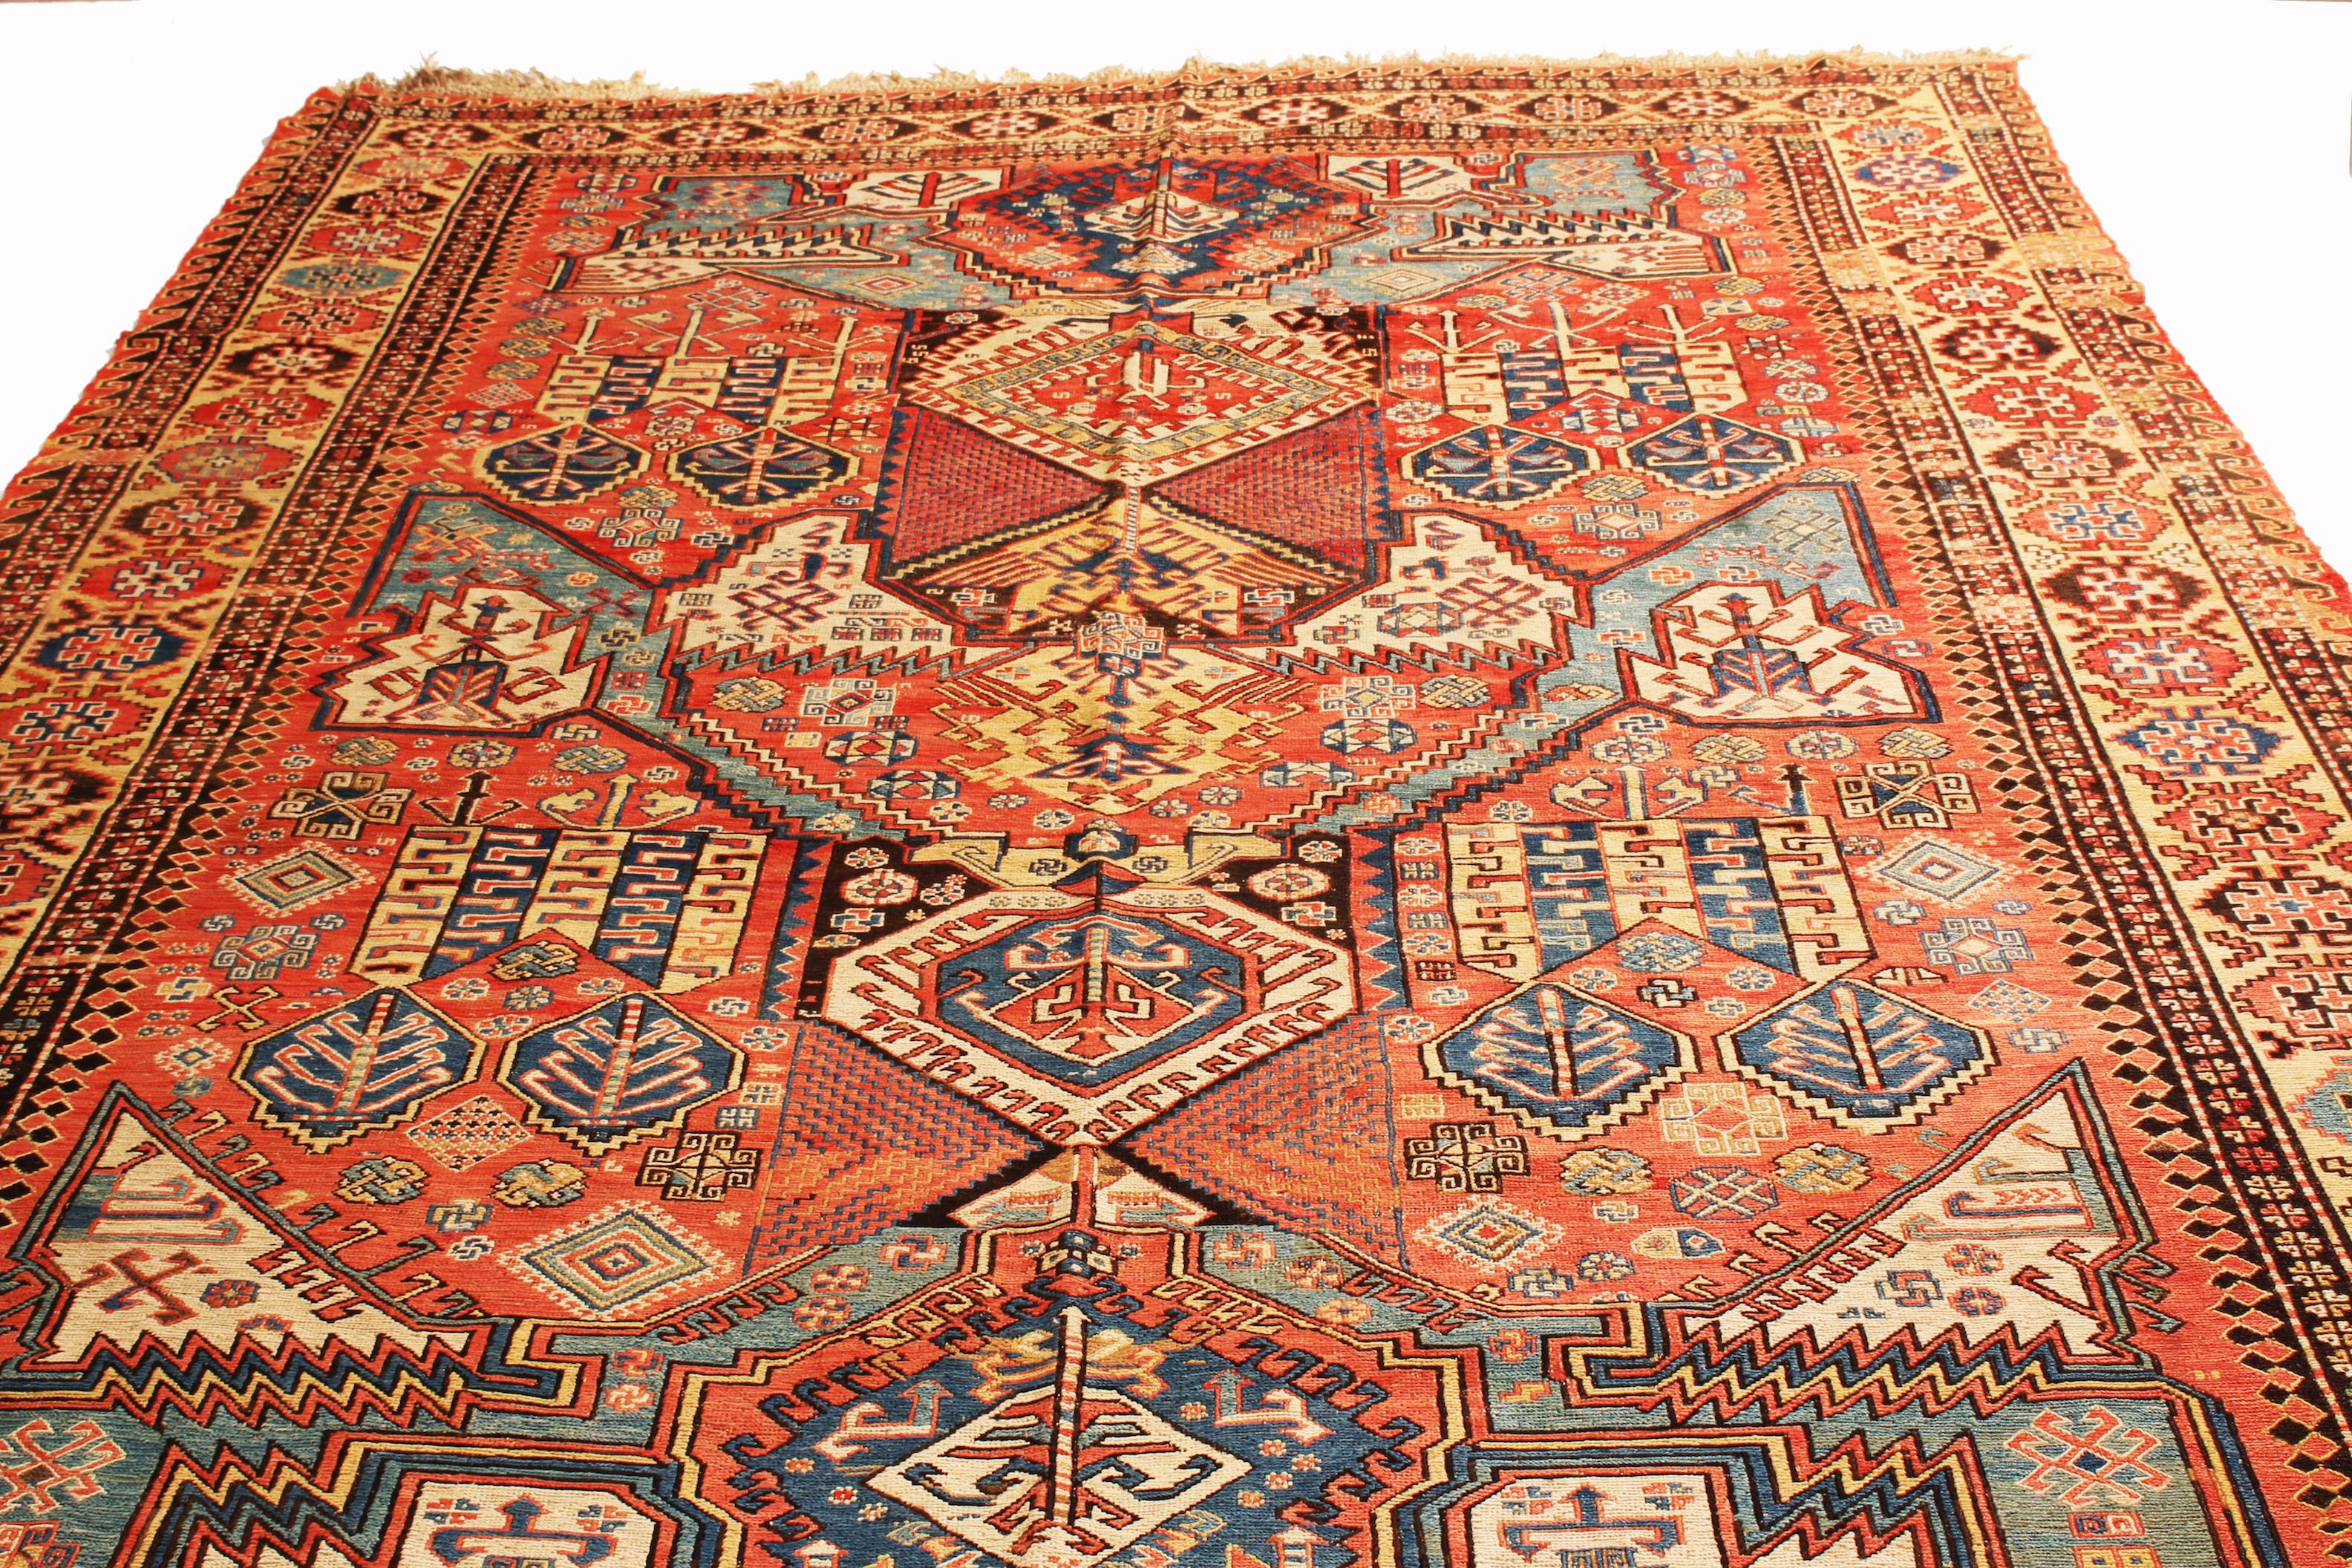 Originating from Russia between 1880-1900, this antique transitional Soumak wool rug hosts a variety of meaningful symbols representing protection, worship, warding, and strength. Hand knotted in high-quality wool with a pallet of rustic but bright